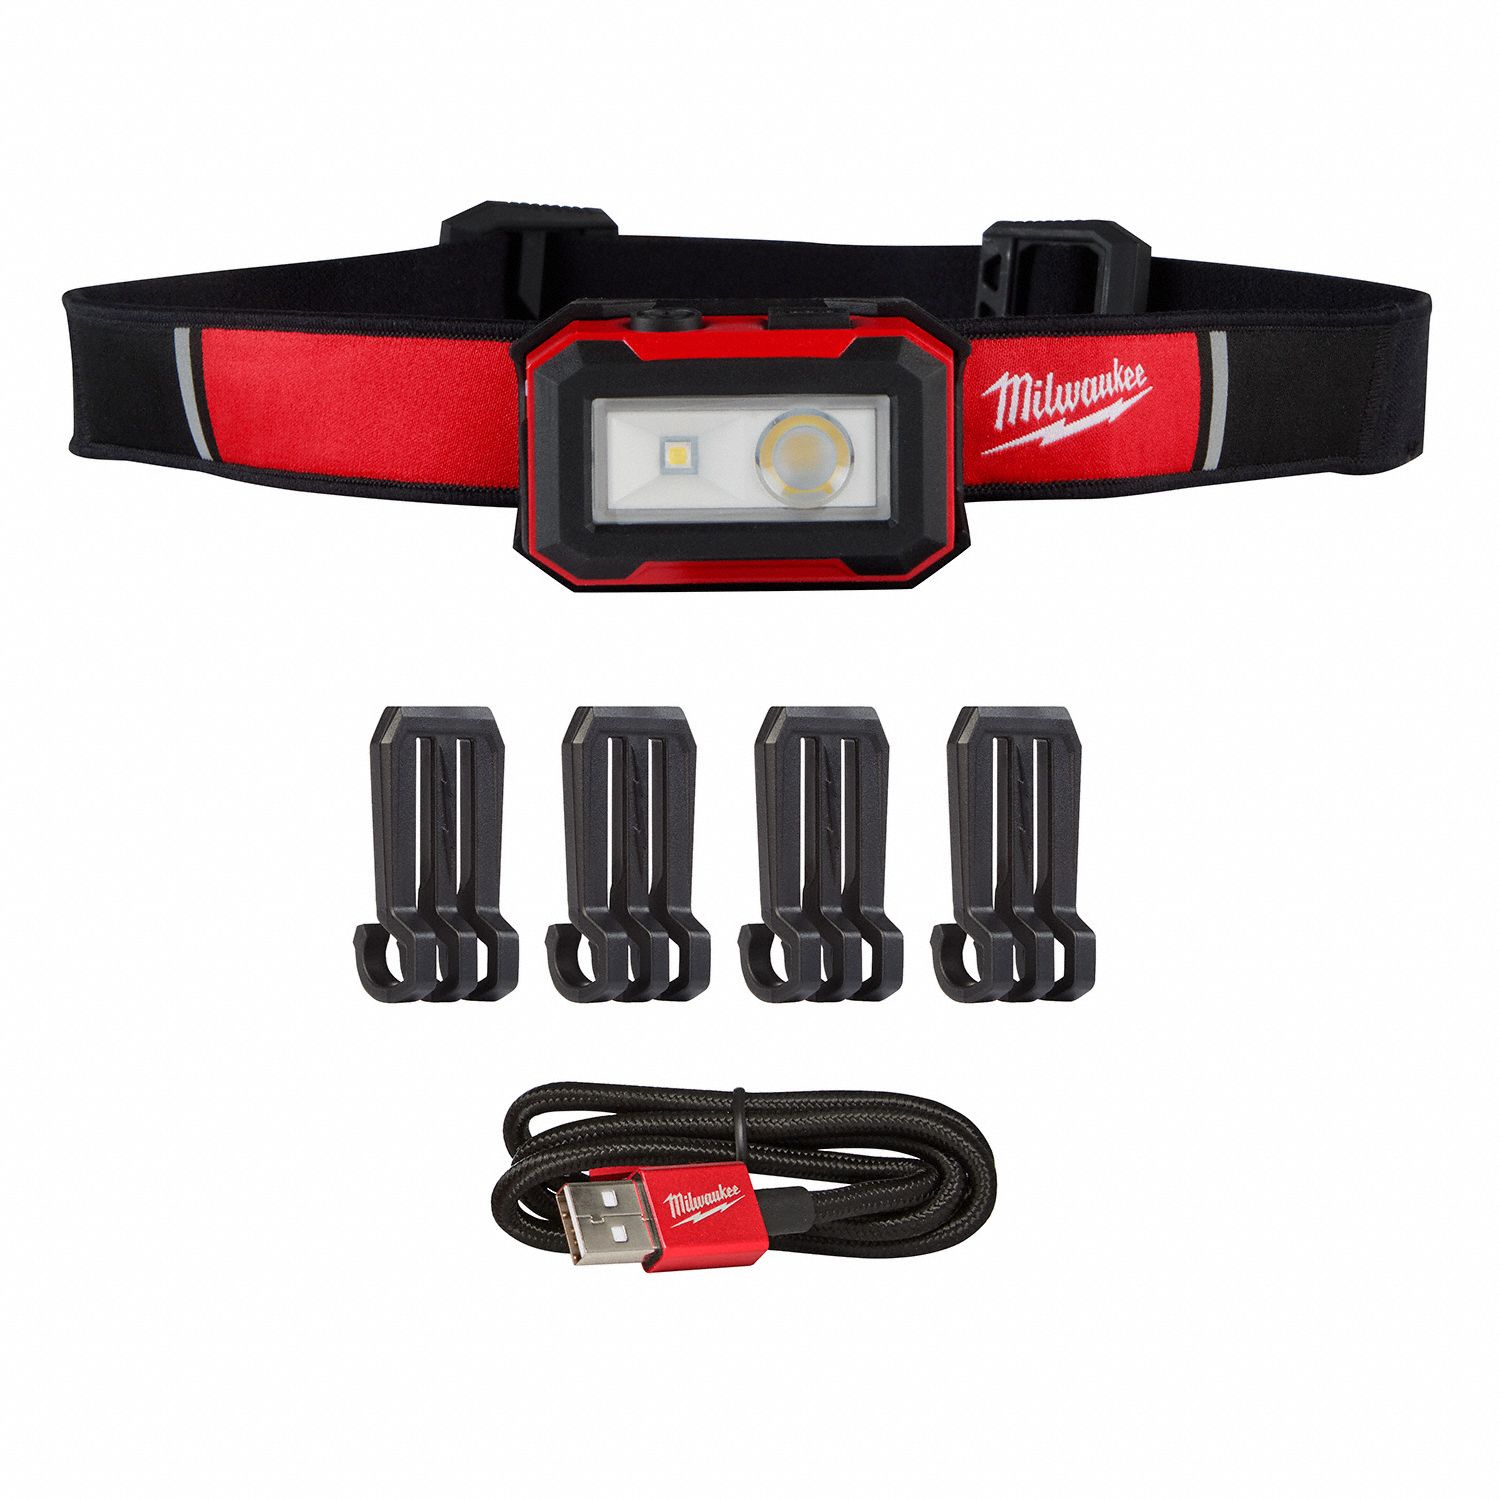 RECHARGEABLE HEADLAMP, 450 LUMENS, 14 HOUR MAX RUN TIME, 70 M MAX BEAM DISTANCE